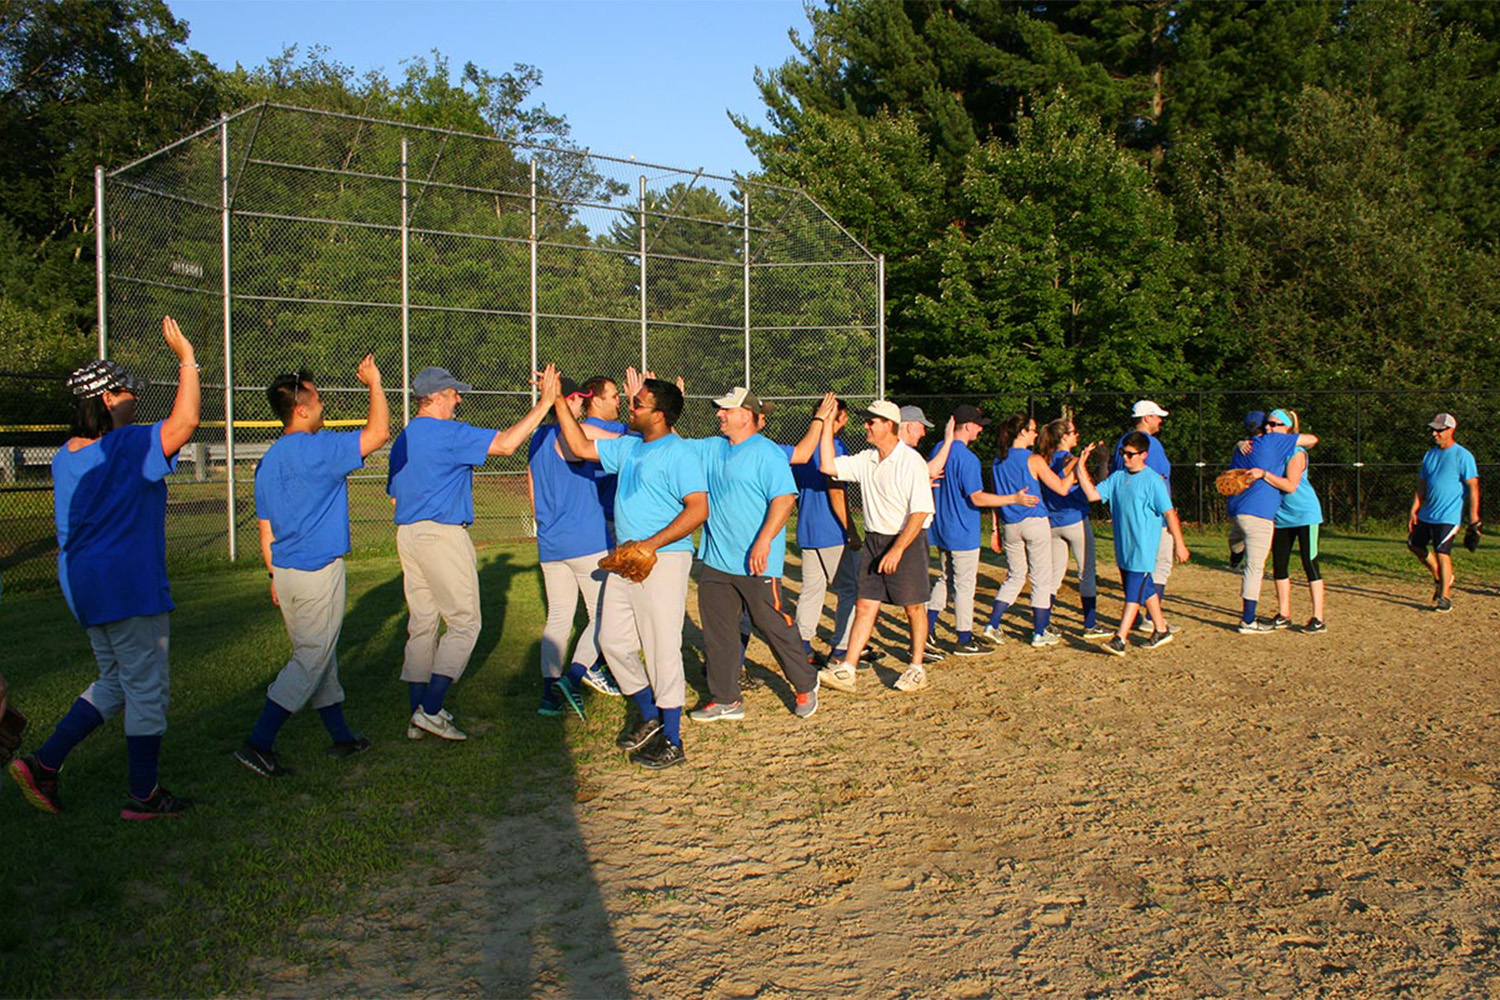 Tocci employees line up to give handshakes after the softball game 